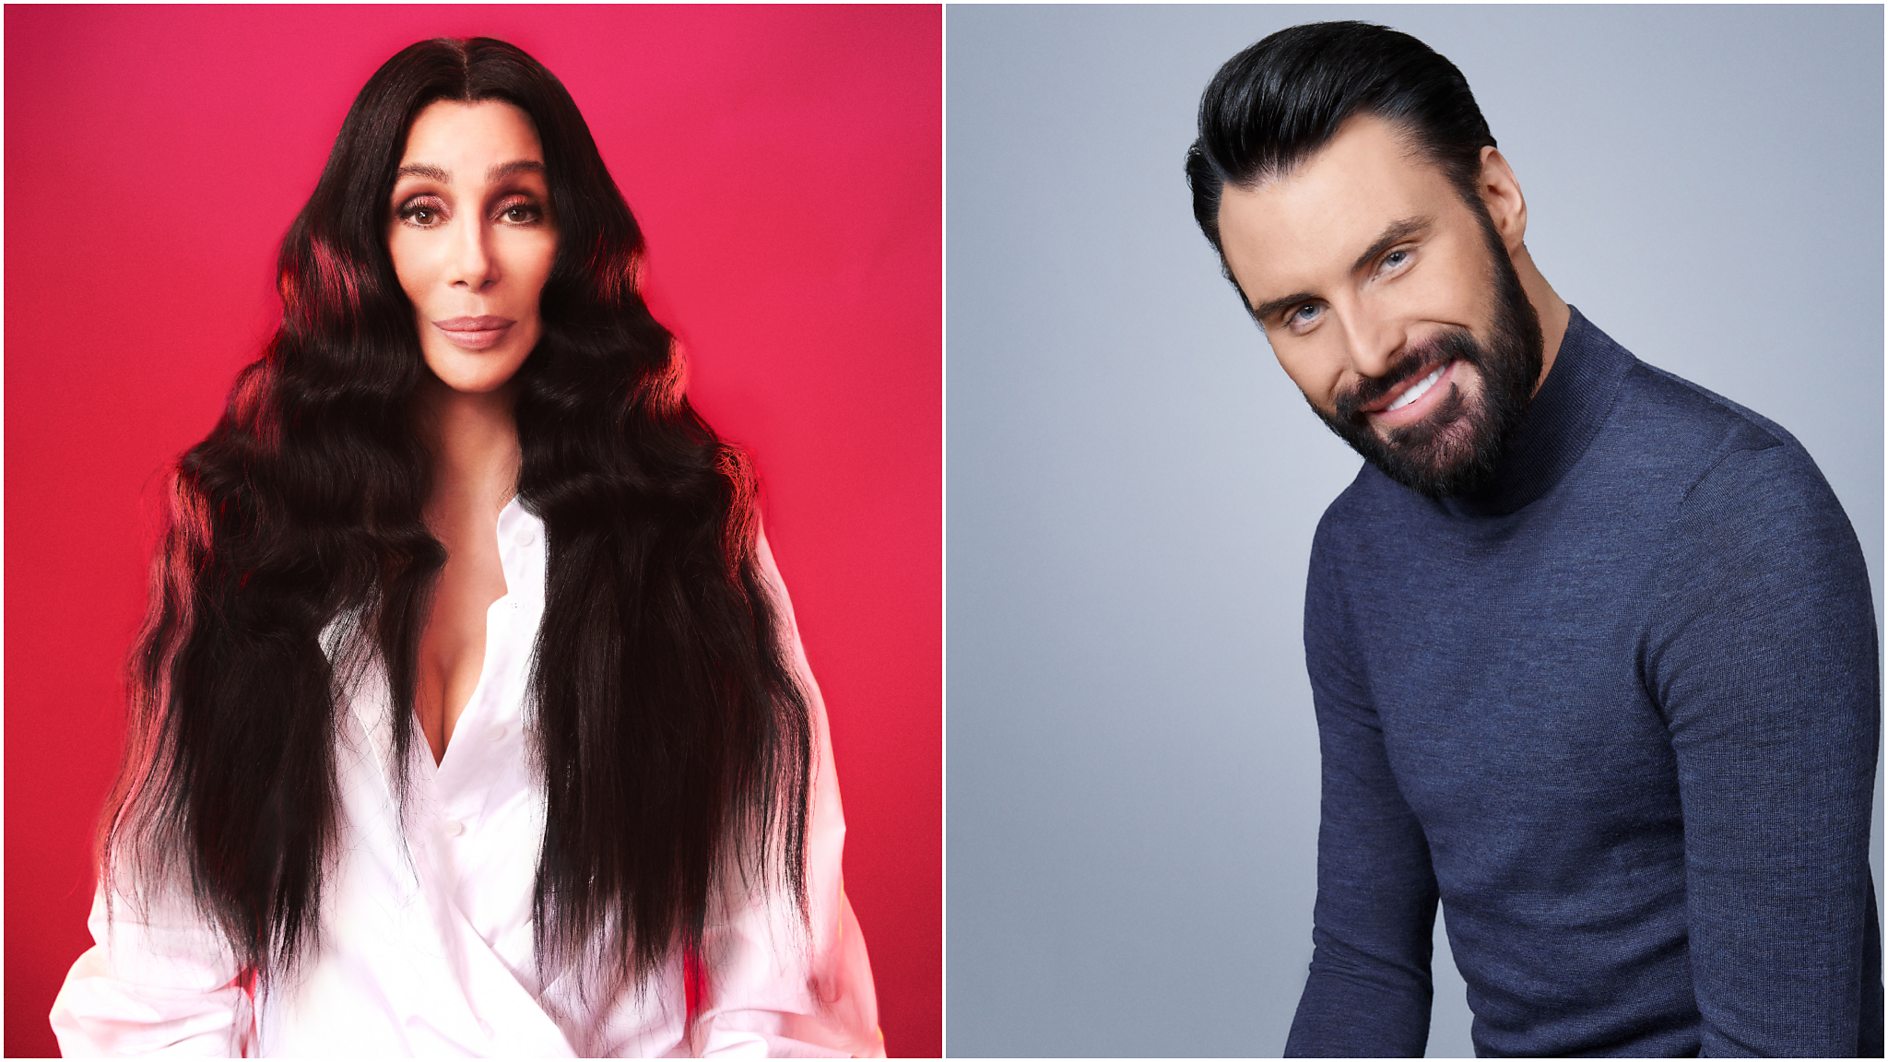 BBC Two and BBC Music announces Cher Meets Rylan